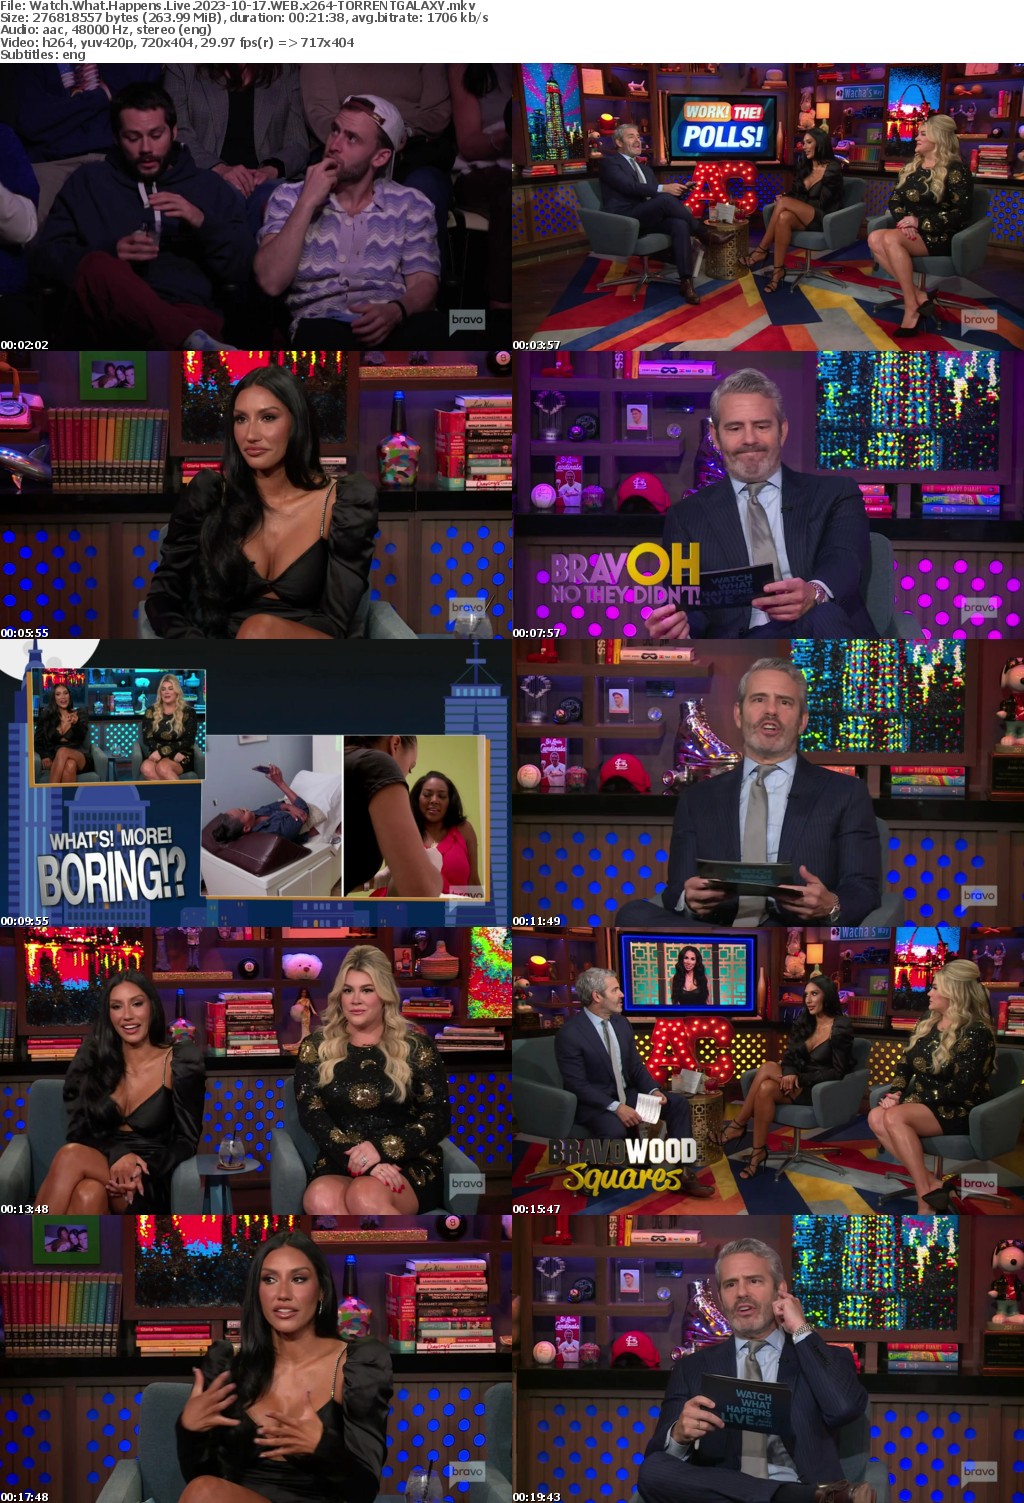 Watch What Happens Live 2023-10-17 WEB x264-GALAXY